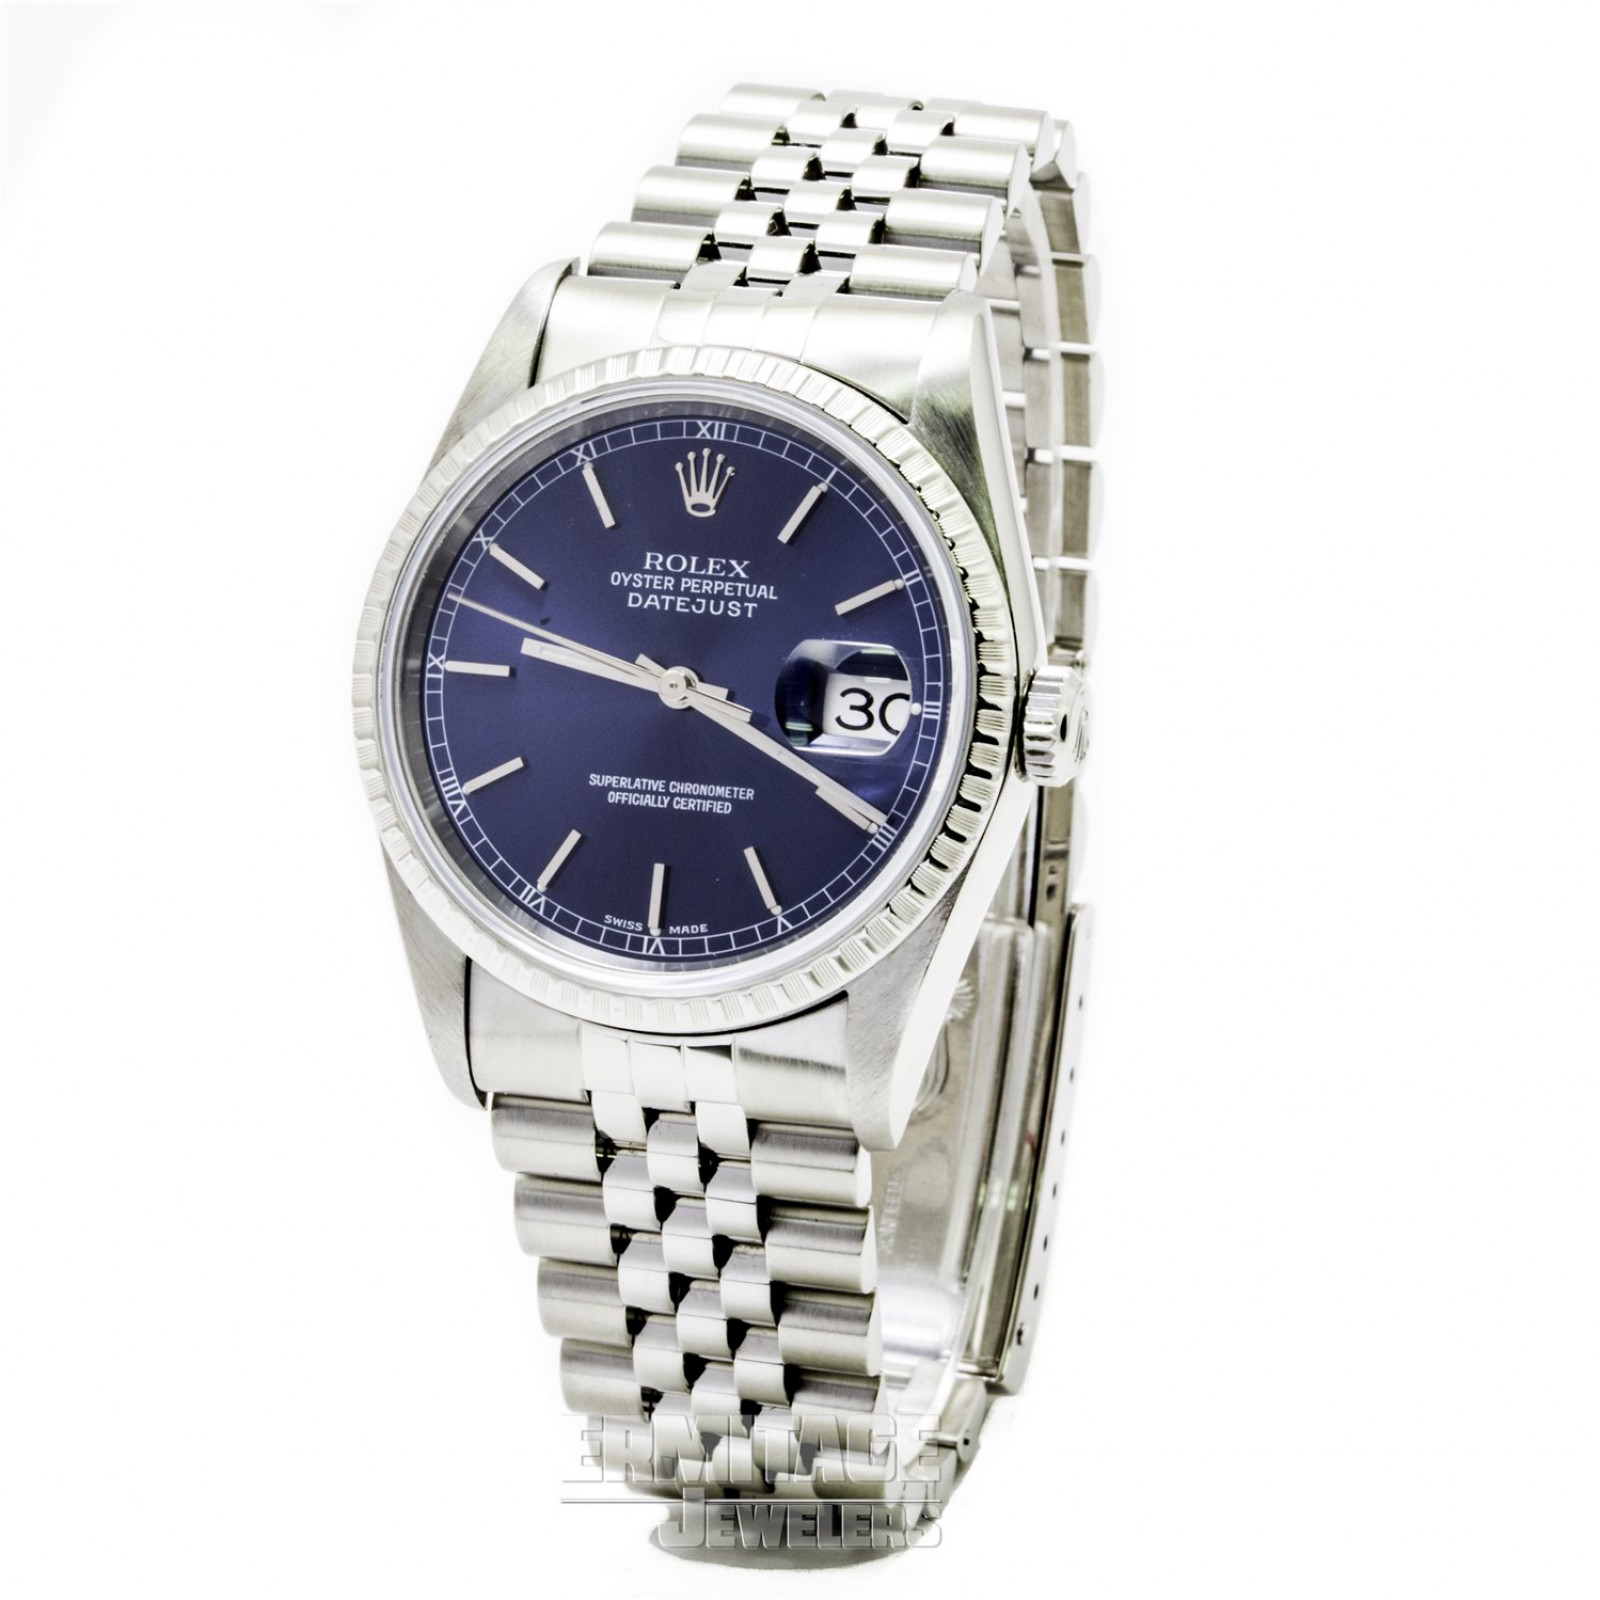 36 mm Rolex Datejust 16220 Steel on Jubilee with Blue Dial